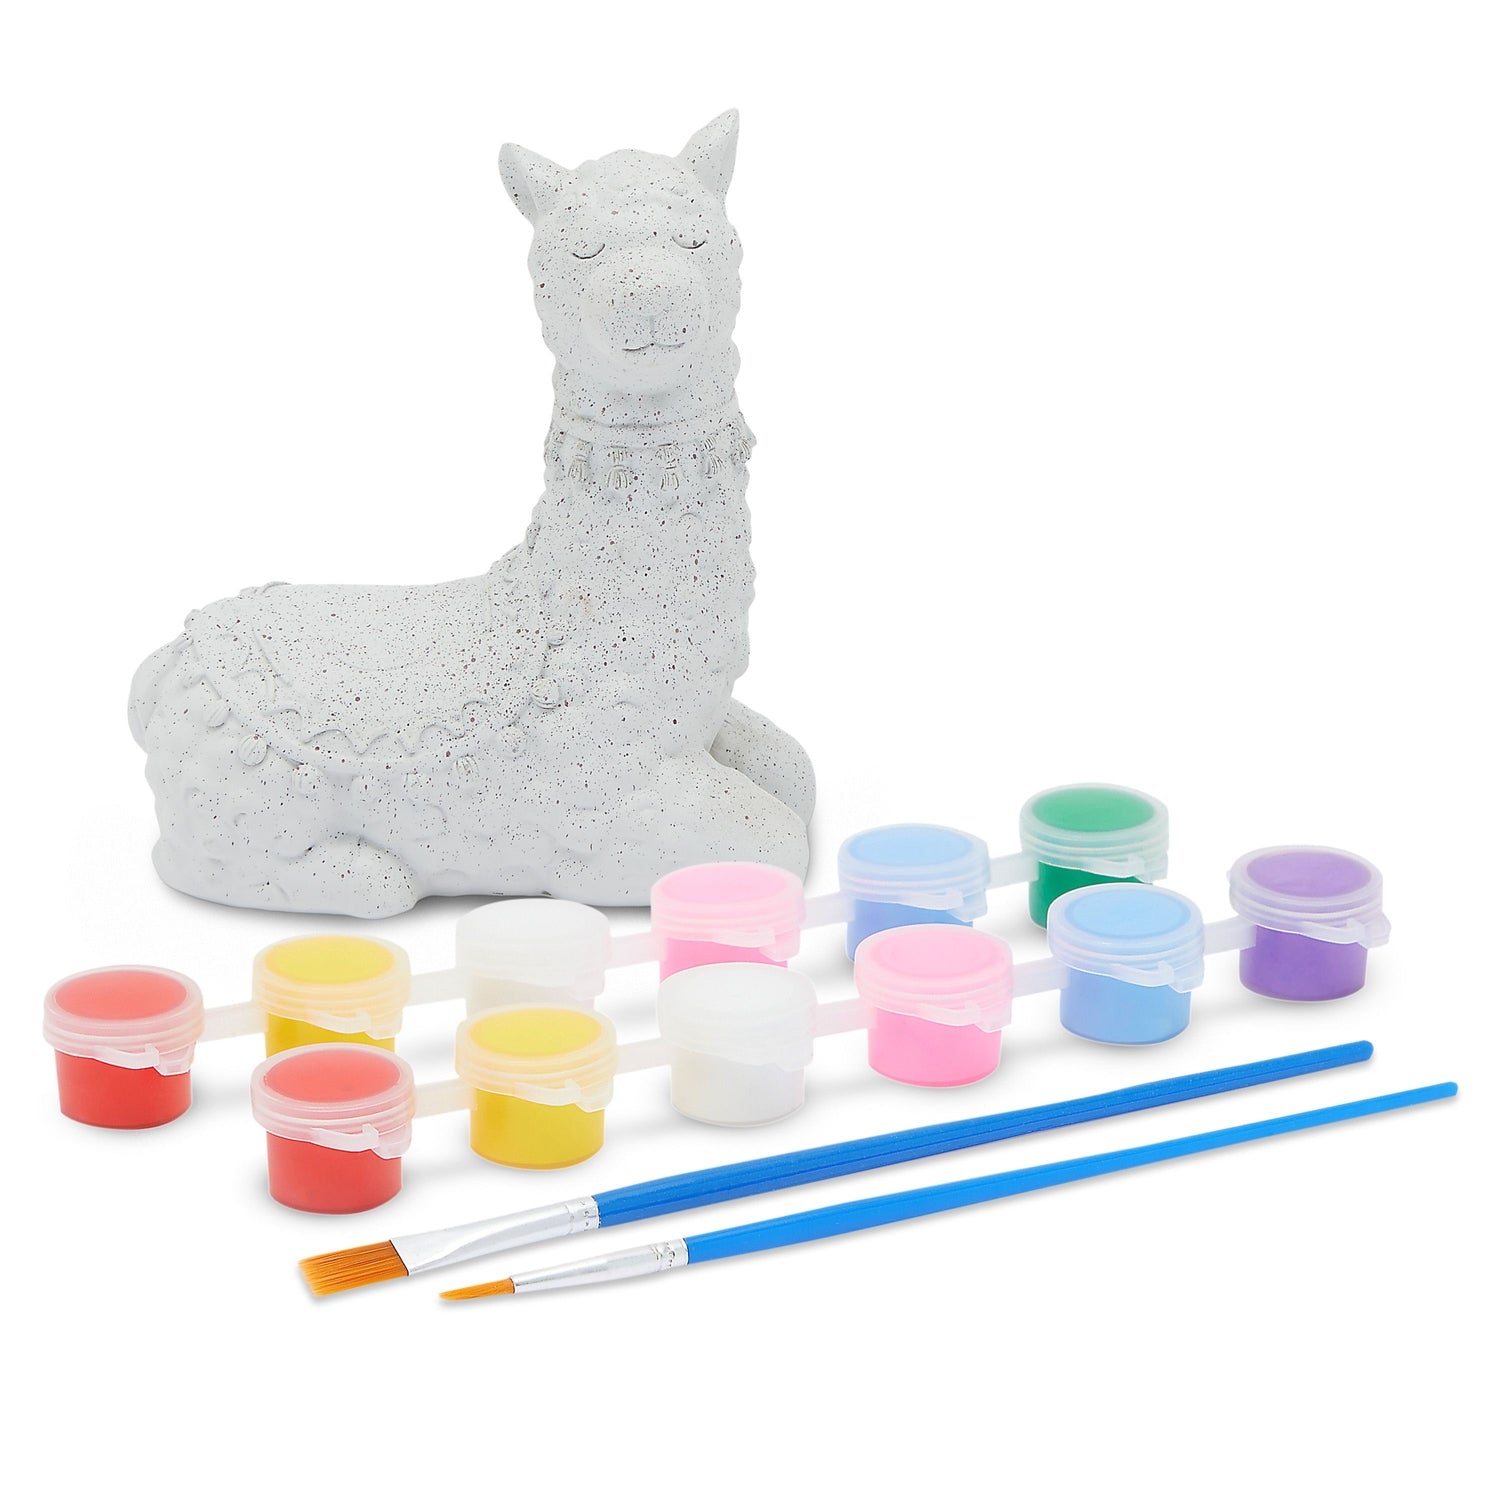 Bright Creations Unicorn and Llama Ceramic Painting Kit for Kids with 3ml Paint Pod Strips, 2 Brushes and 2 Figures